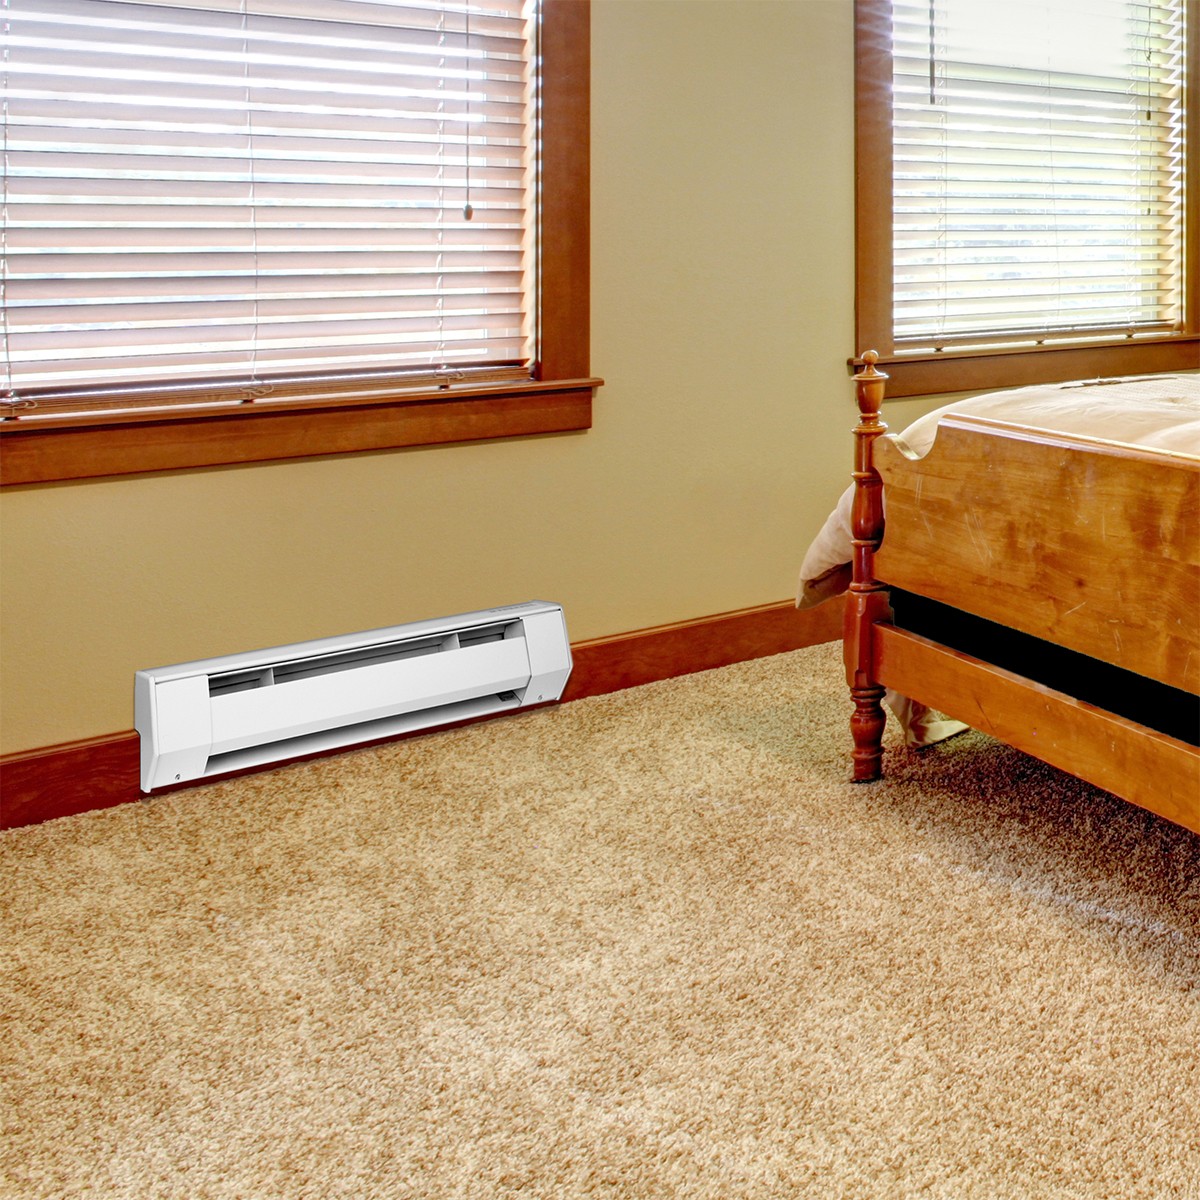 Powerful Review: King Electric K Series 120 Volt Electric Baseboard Heater